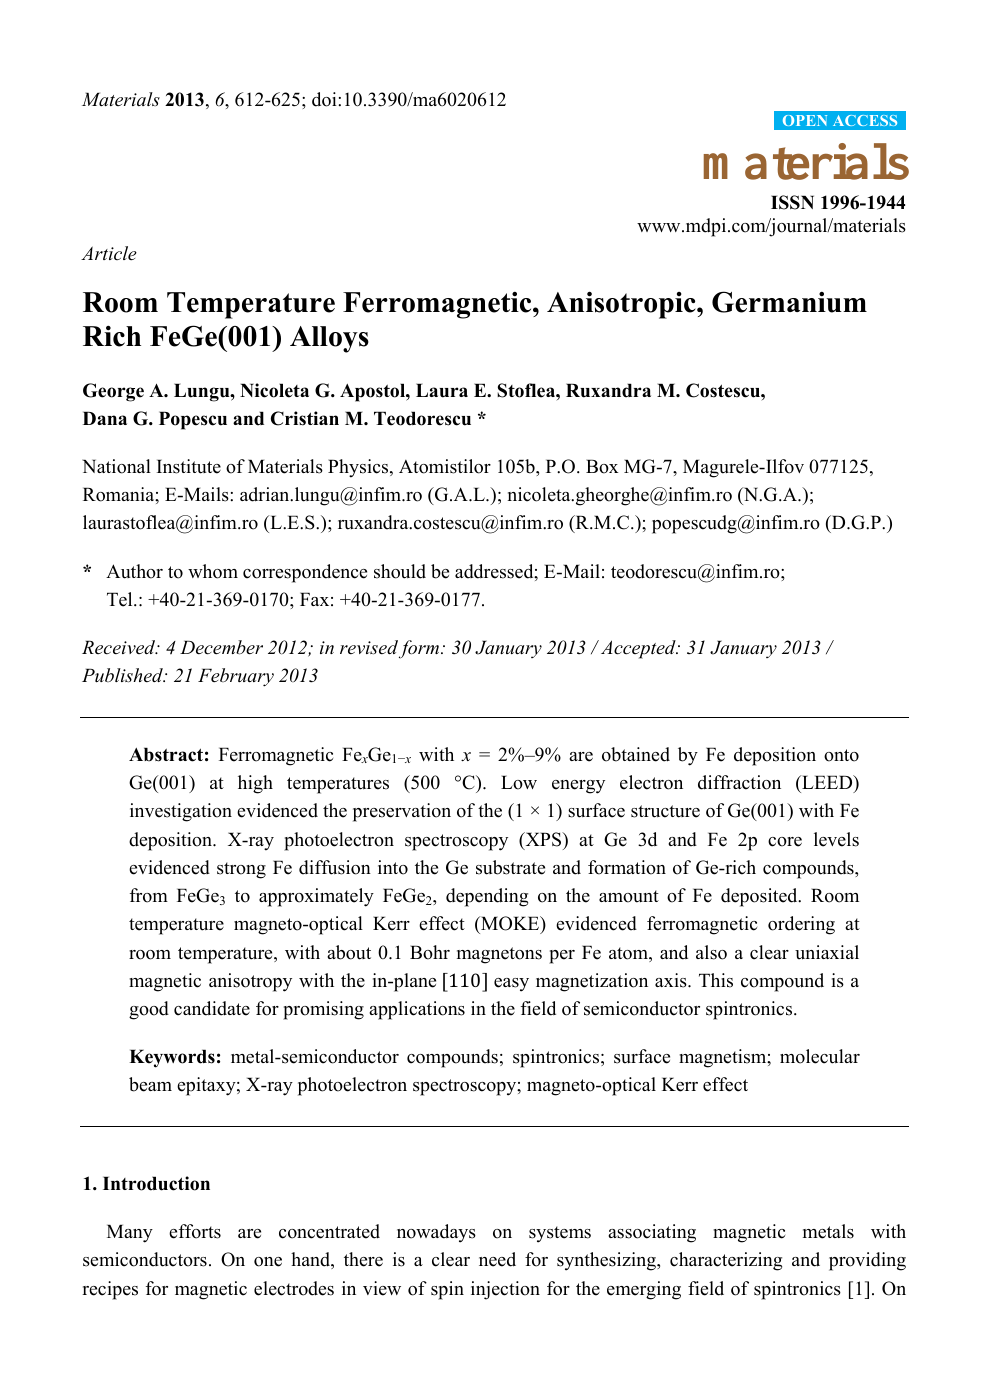 Room Temperature Ferromagnetic Anisotropic Germanium Rich Fege 001 Alloys Topic Of Research Paper In Nano Technology Download Scholarly Article Pdf And Read For Free On Cyberleninka Open Science Hub